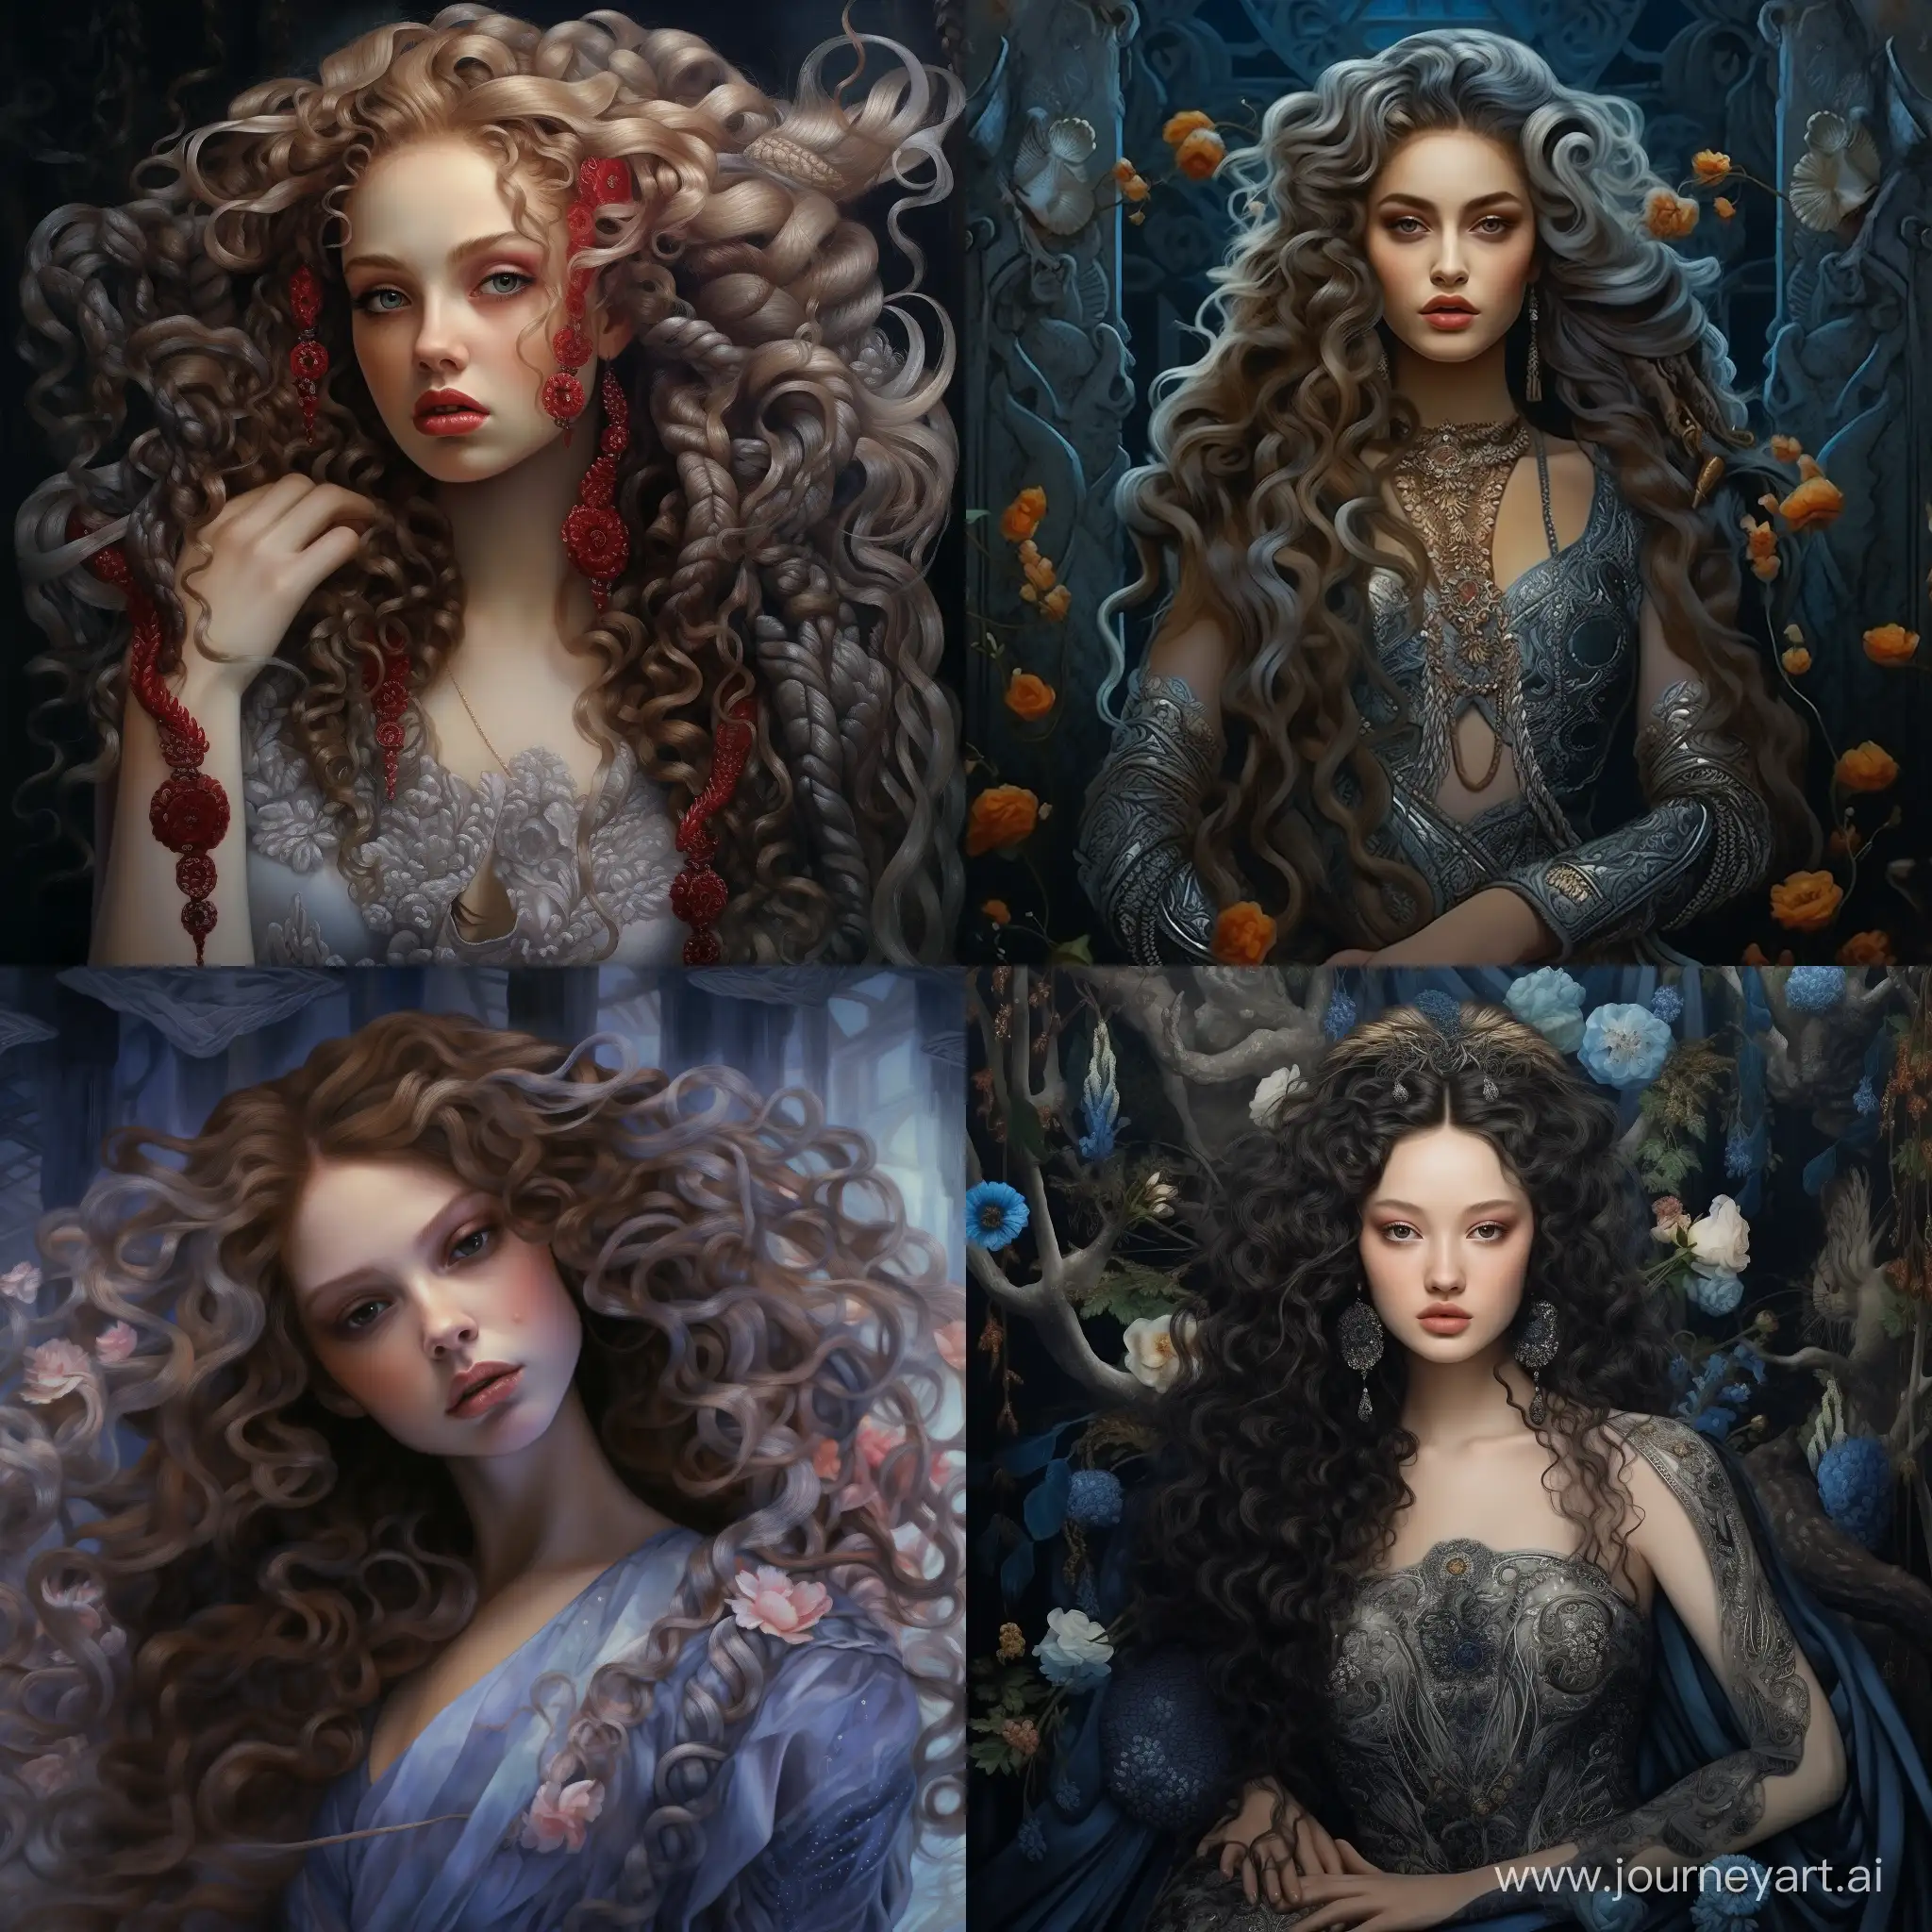 Exquisite-Eastern-Girl-with-Intricate-Braided-Hair-in-NeoRenaissance-Digital-Art